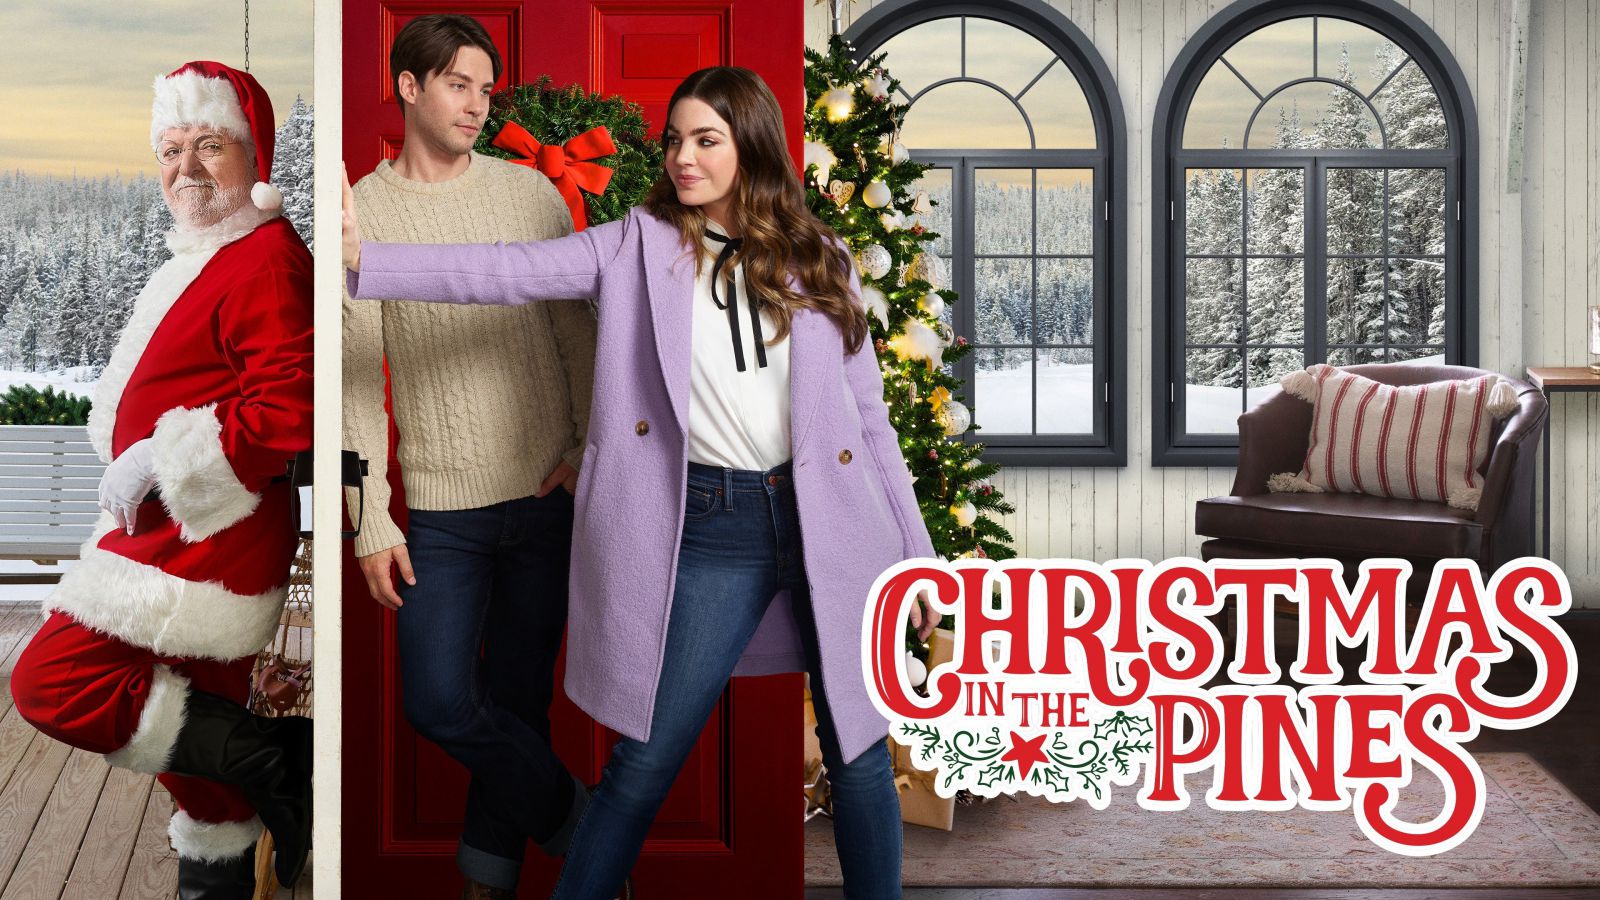 Merry Christmas Movie: Christmas in the Pines